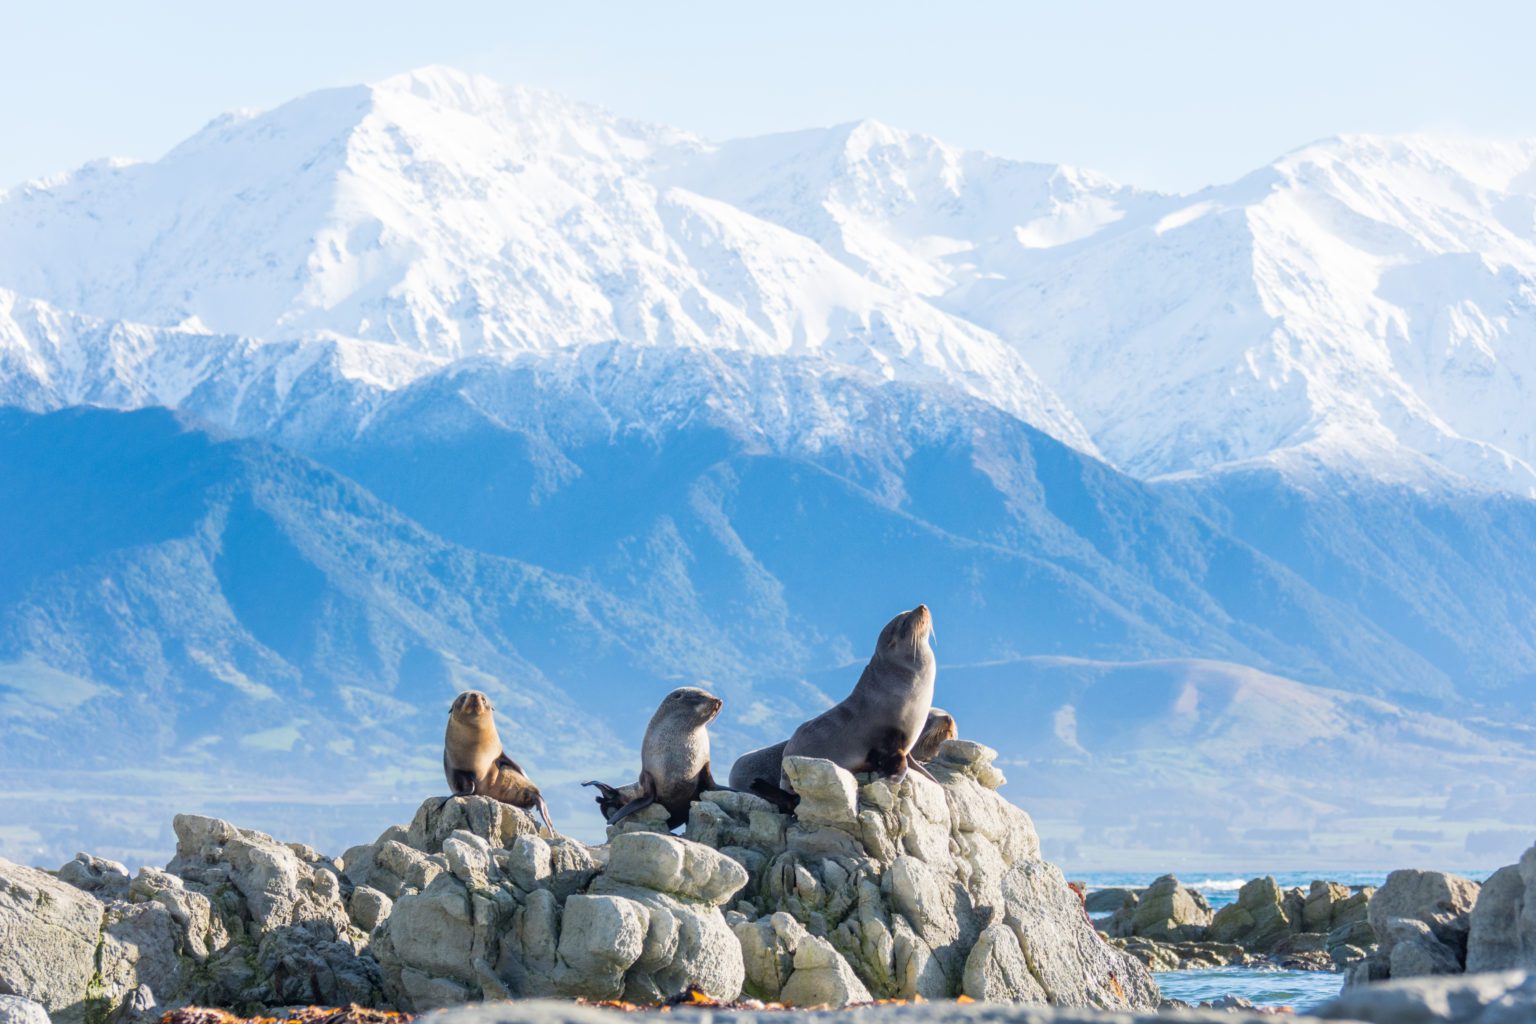 seals atop some rocks with snowy mountains in the background